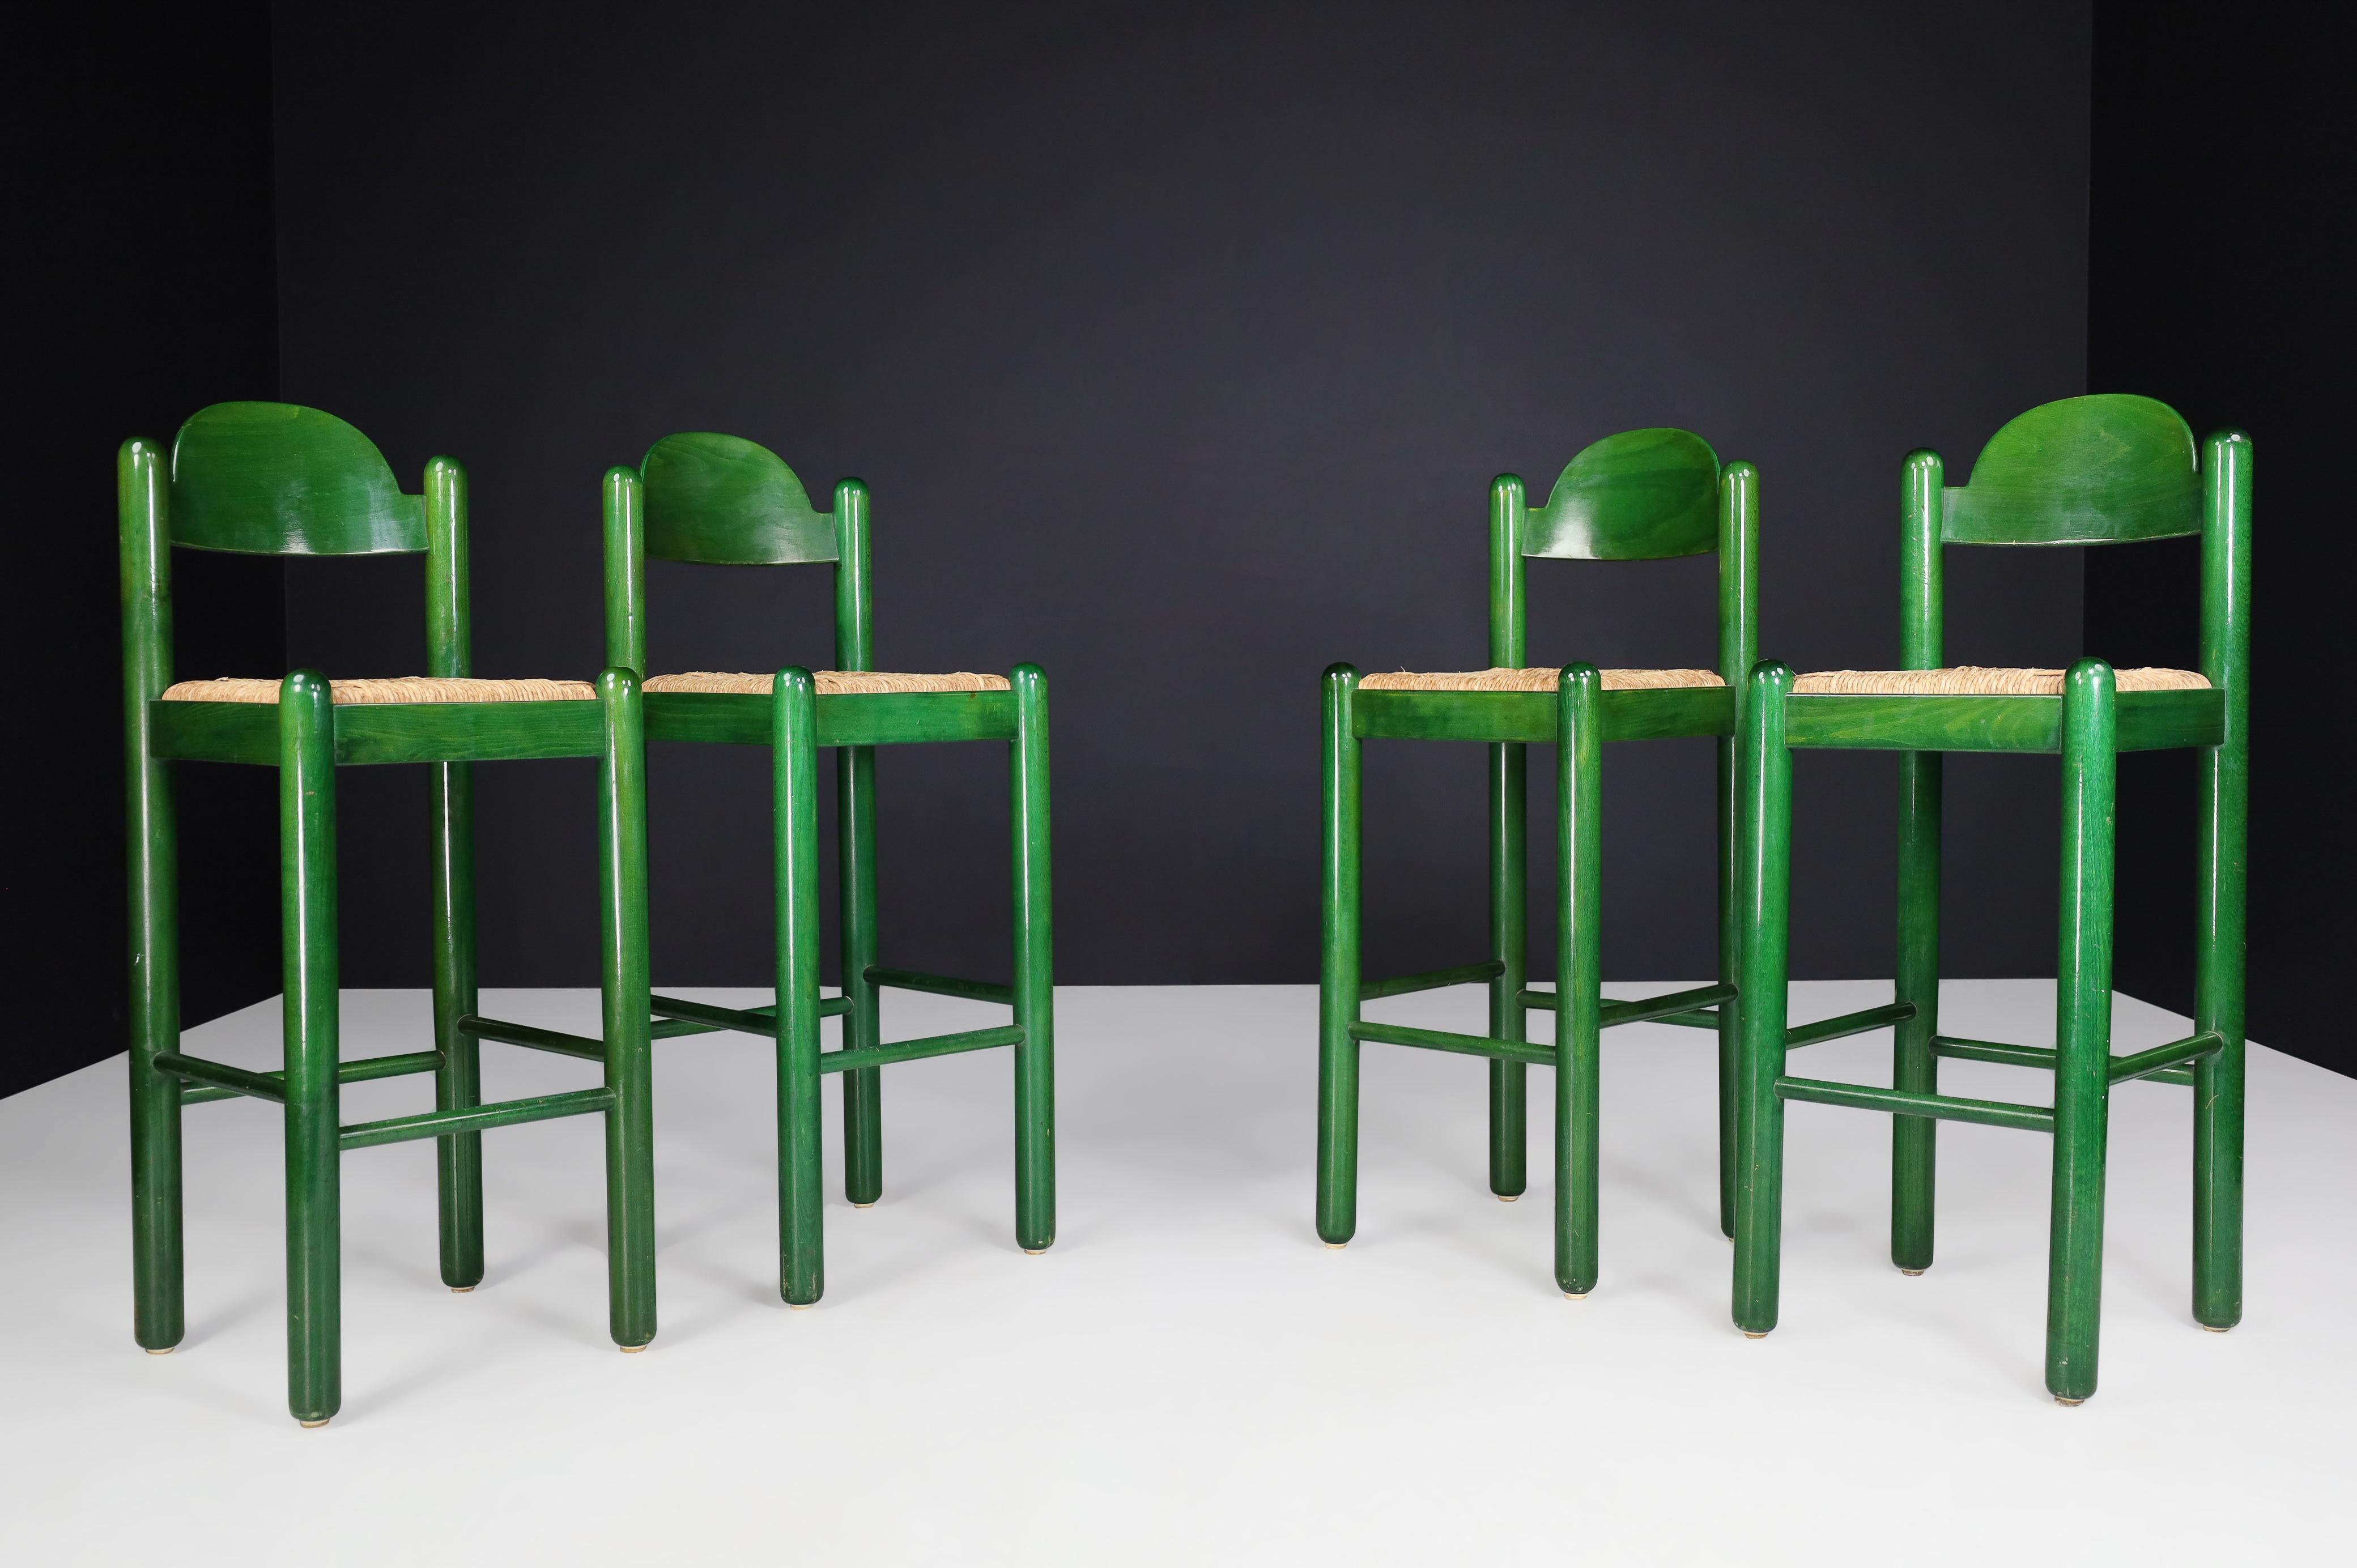 Vico Magistretti for Cassina green bar stools with seagrass seats, Italy 1960s

This rare set of four bar stools, designed by the renowned Italian architect and industrial designer Vico Magistretti for Cassina in Italy during the 1960s, is a true